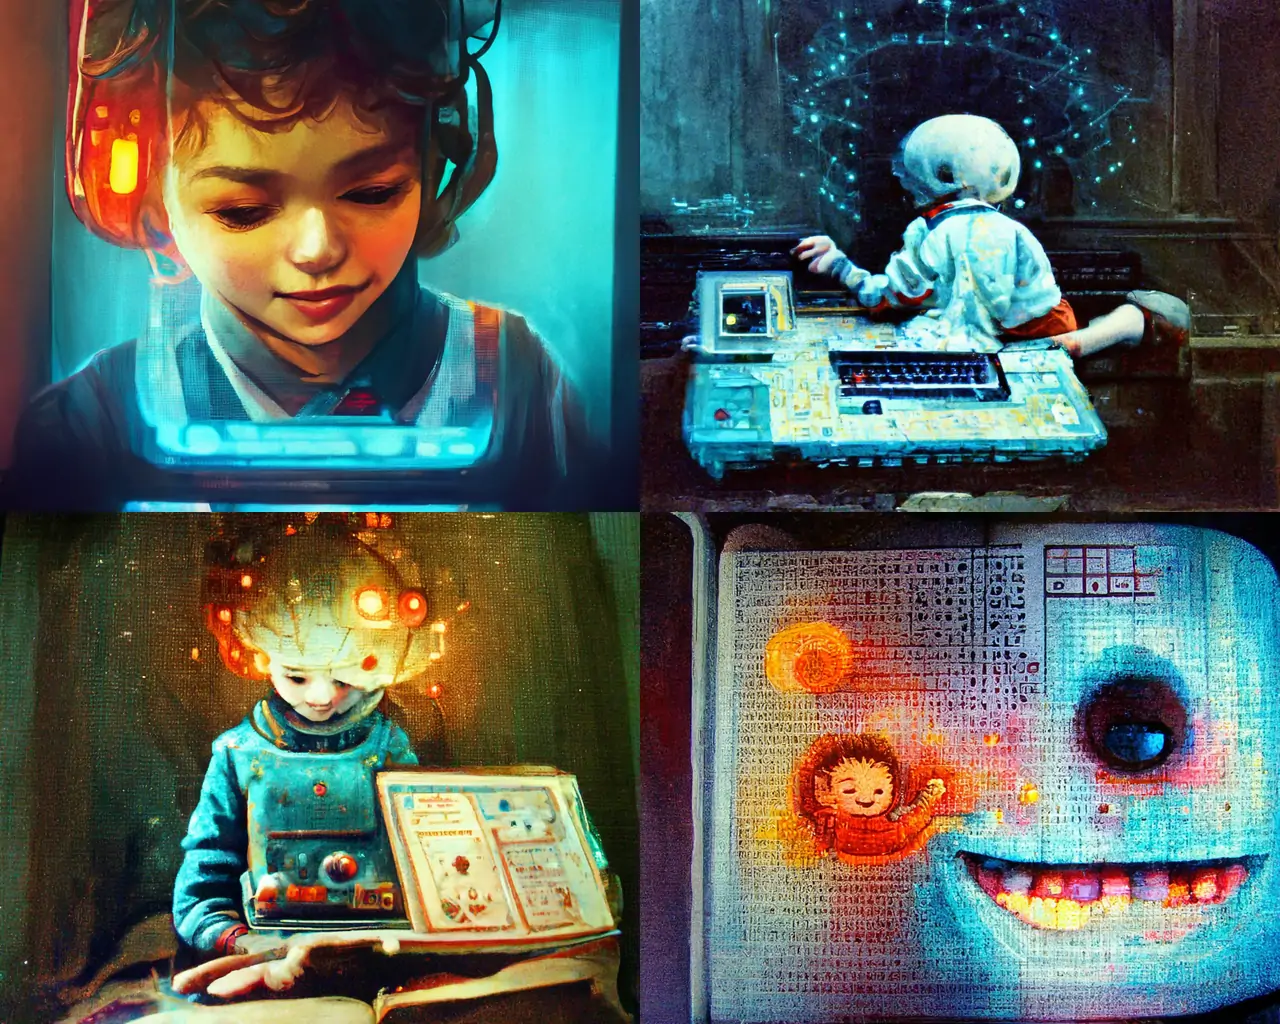 "A child playing with a computer that contains all the knowledge in the universe. The child is happy and warm." Image generated by Midjourney.com